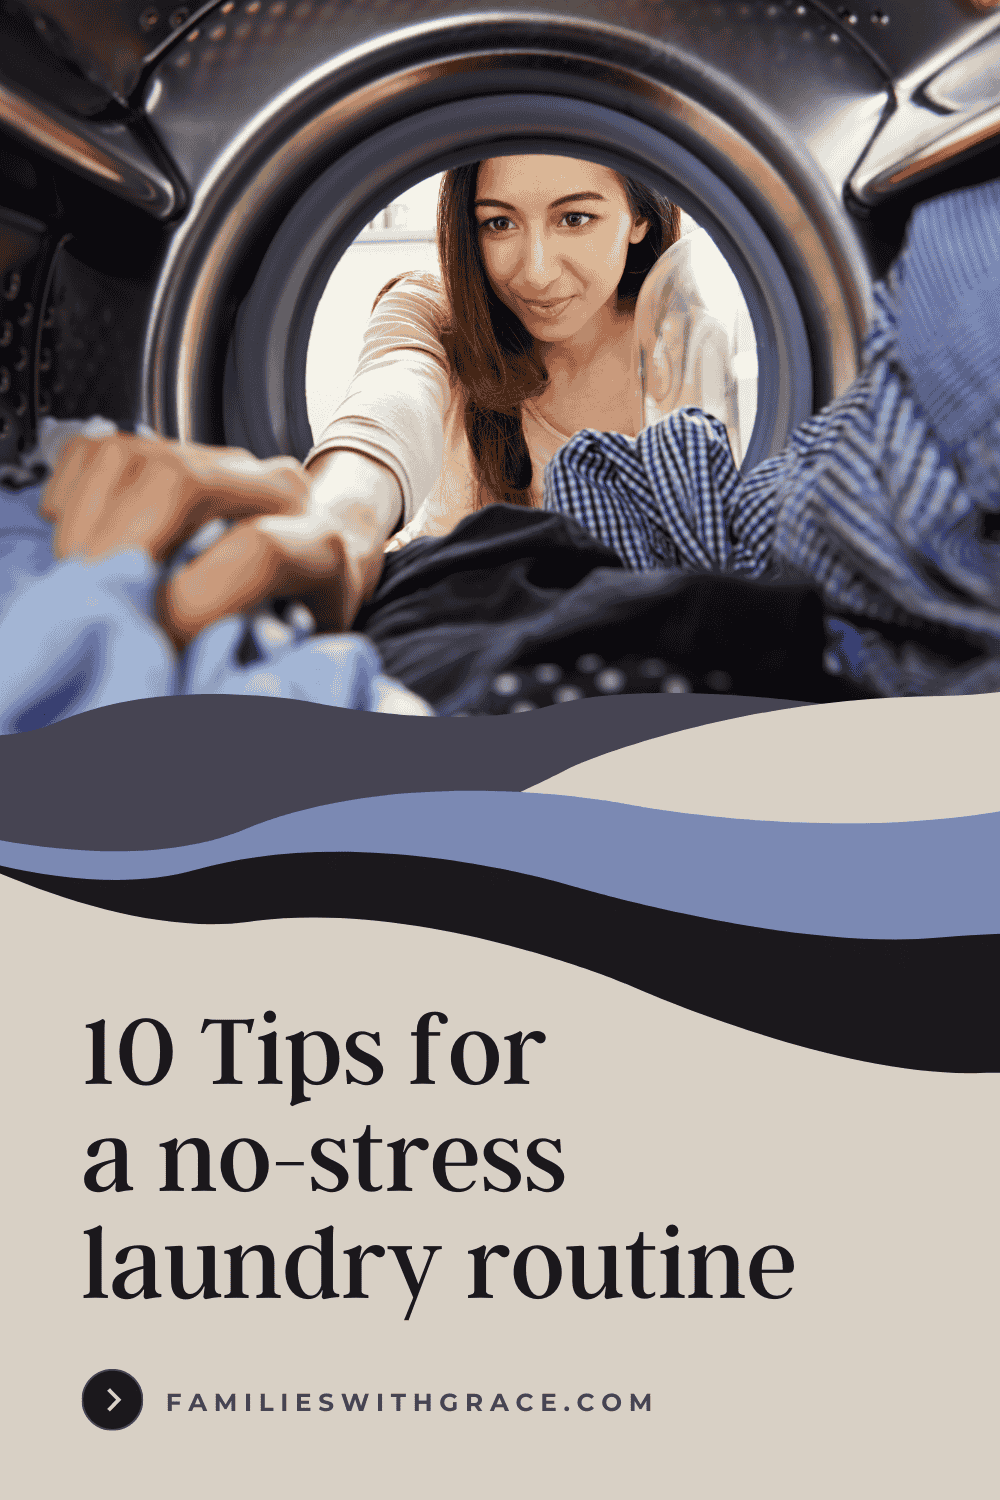 Create a laundry routine that works